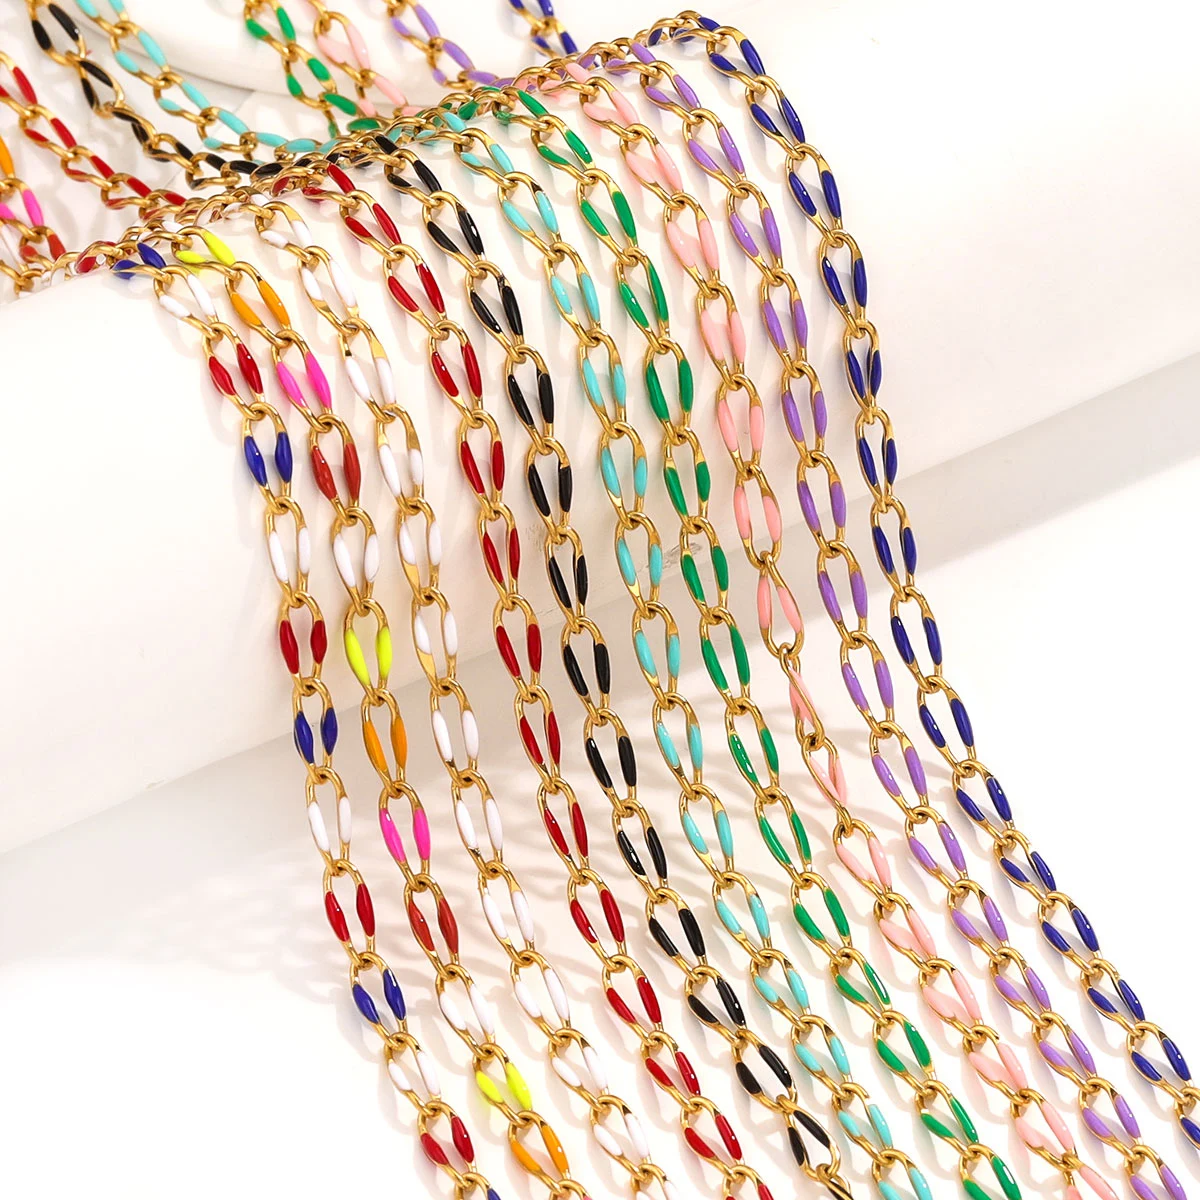 

1 Meter Enamel Twisted Chain Stainless Steel Cable Rolo Link Body Gold Chain Belt for Jewelry Making DIY Necklace Bracelet Lots